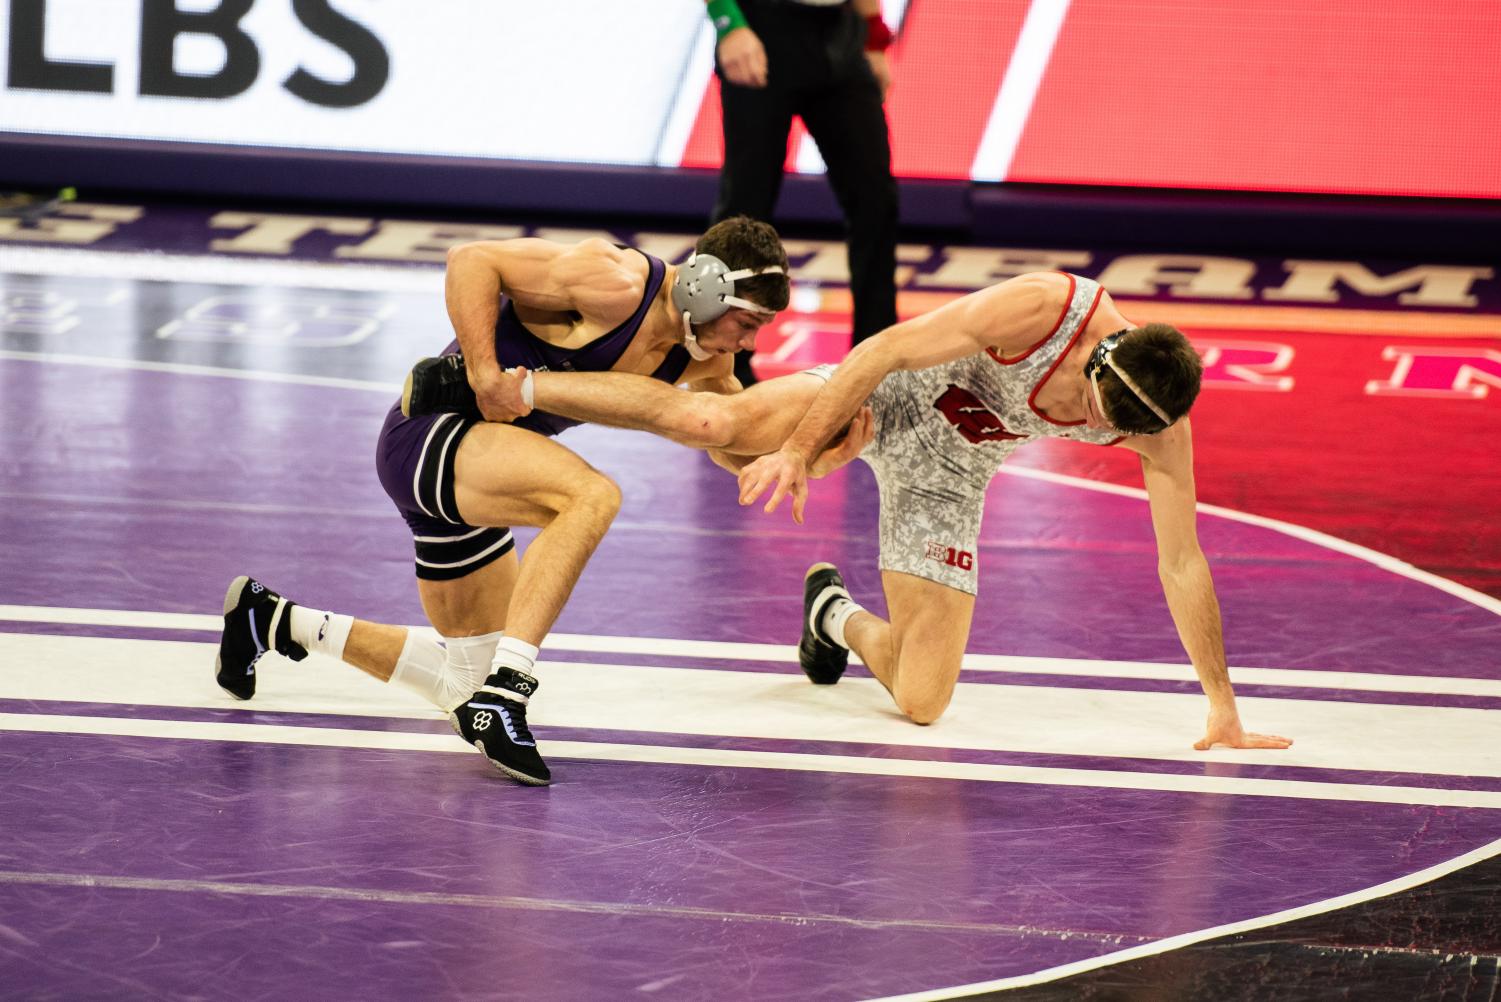 Two+wrestlers+on+a+mat